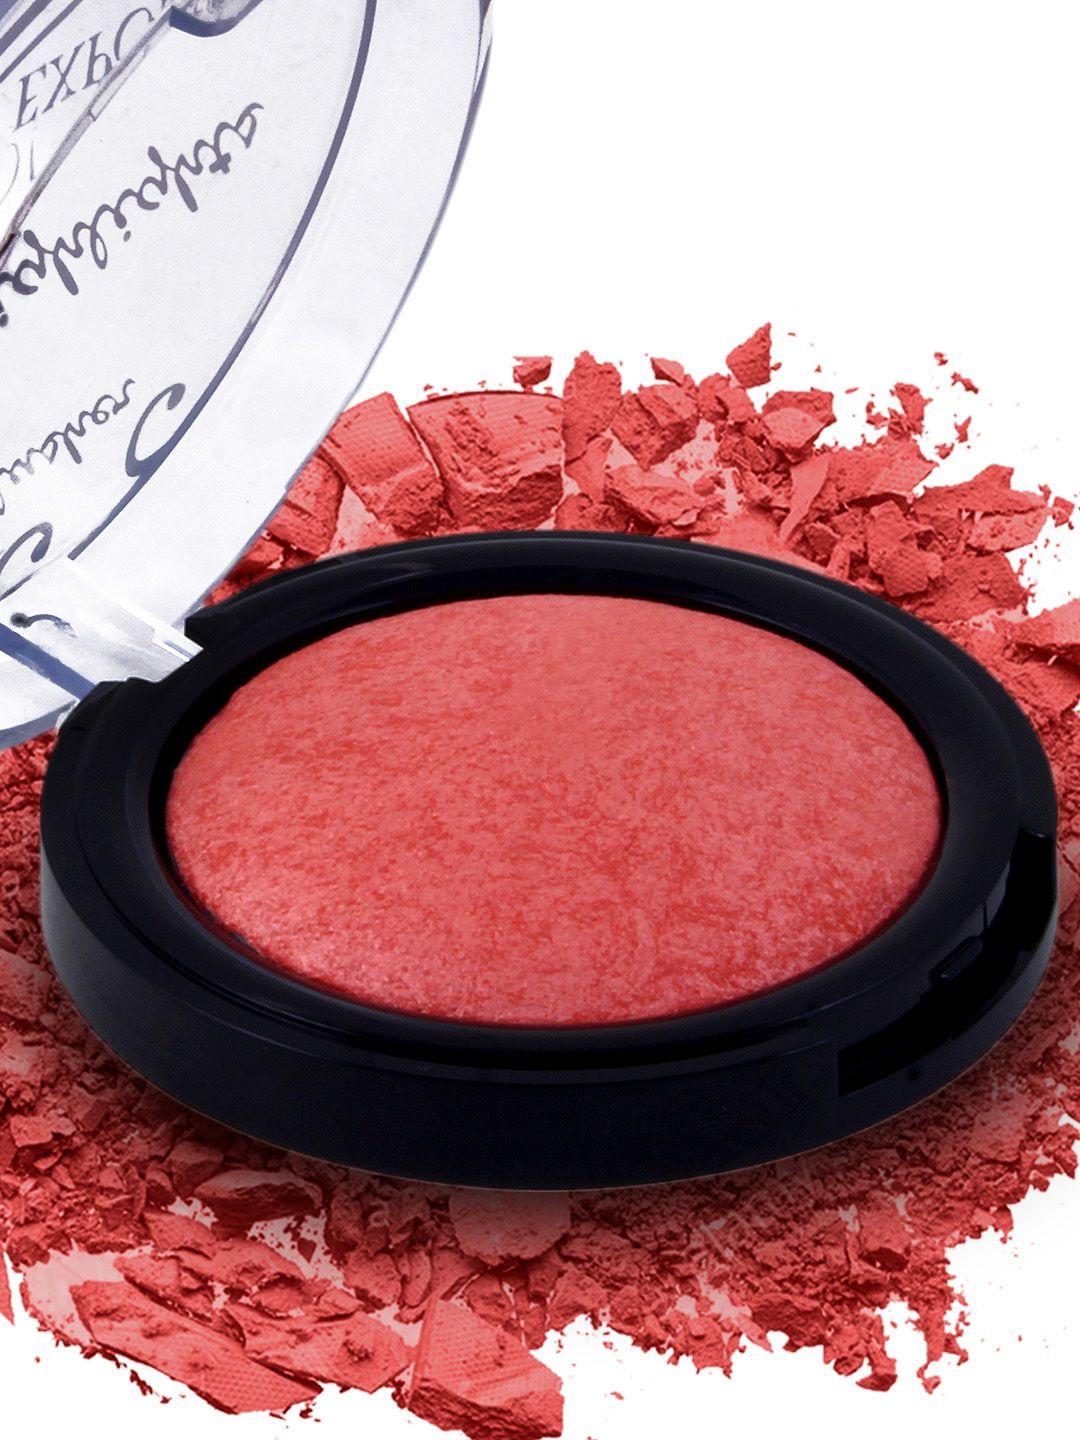 incolor-exposed-highlighter-blusher-tomato-22---9-g